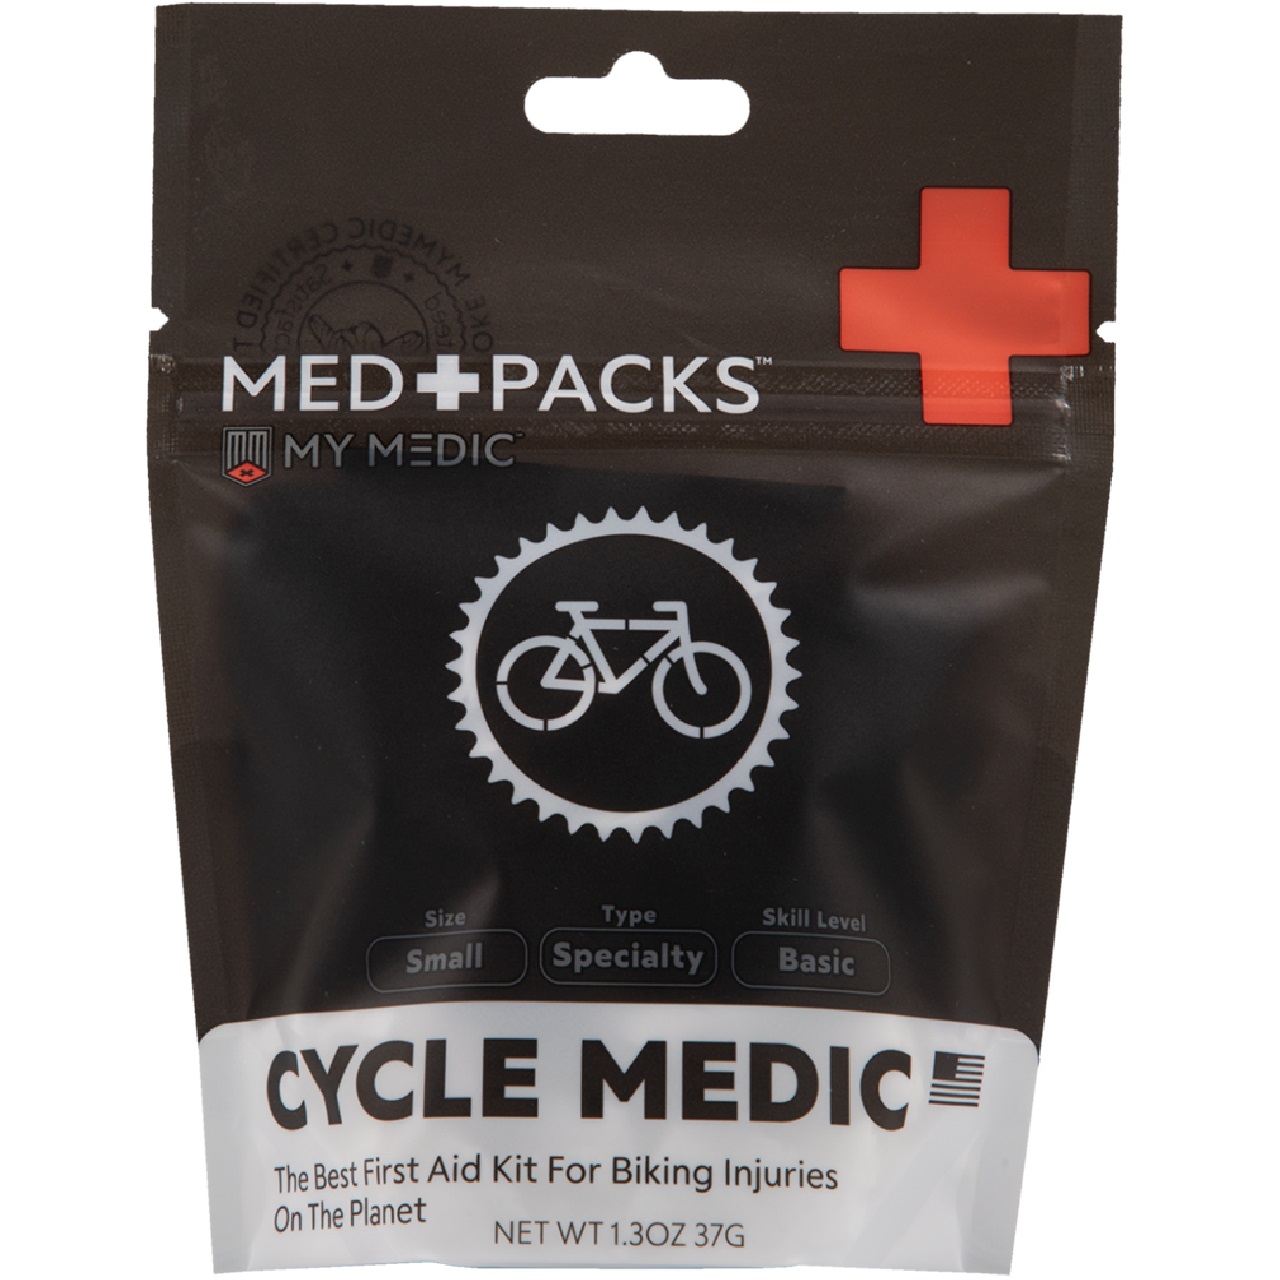 MyMedic Medpack Cycle Medic Cycling First Aid Kit